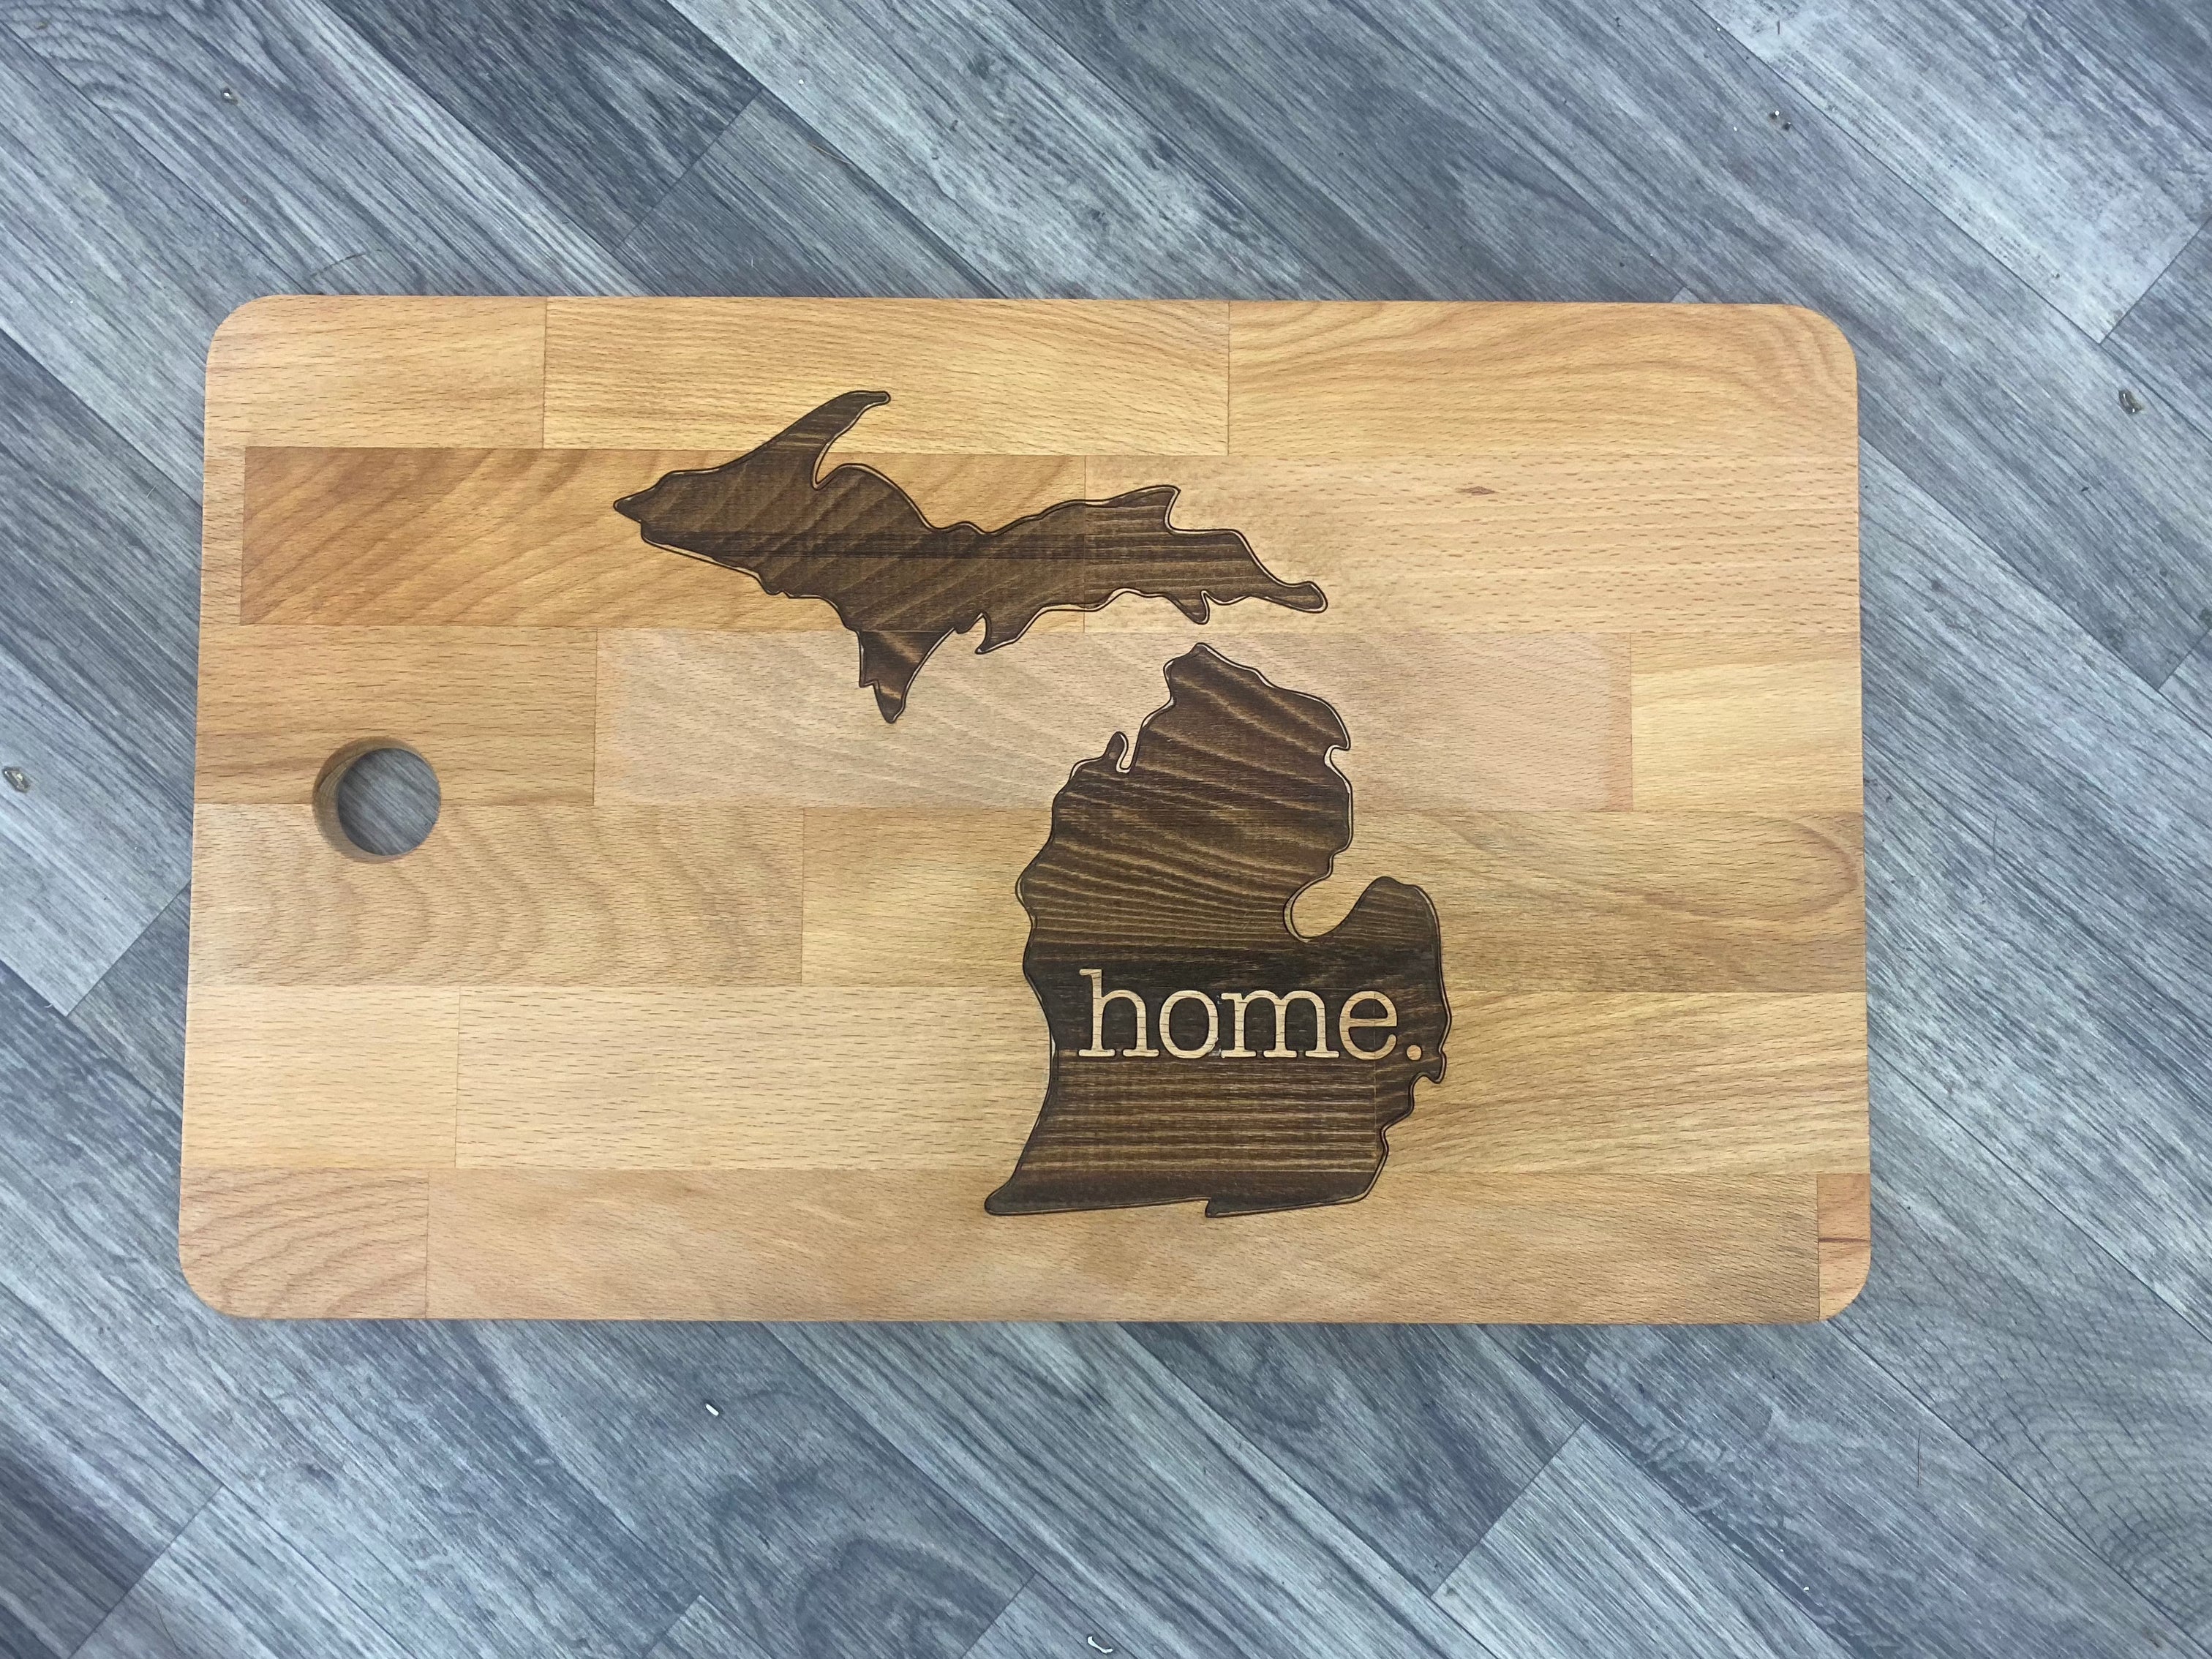 Home Michigan - Wooden Engraved - Cutting Board